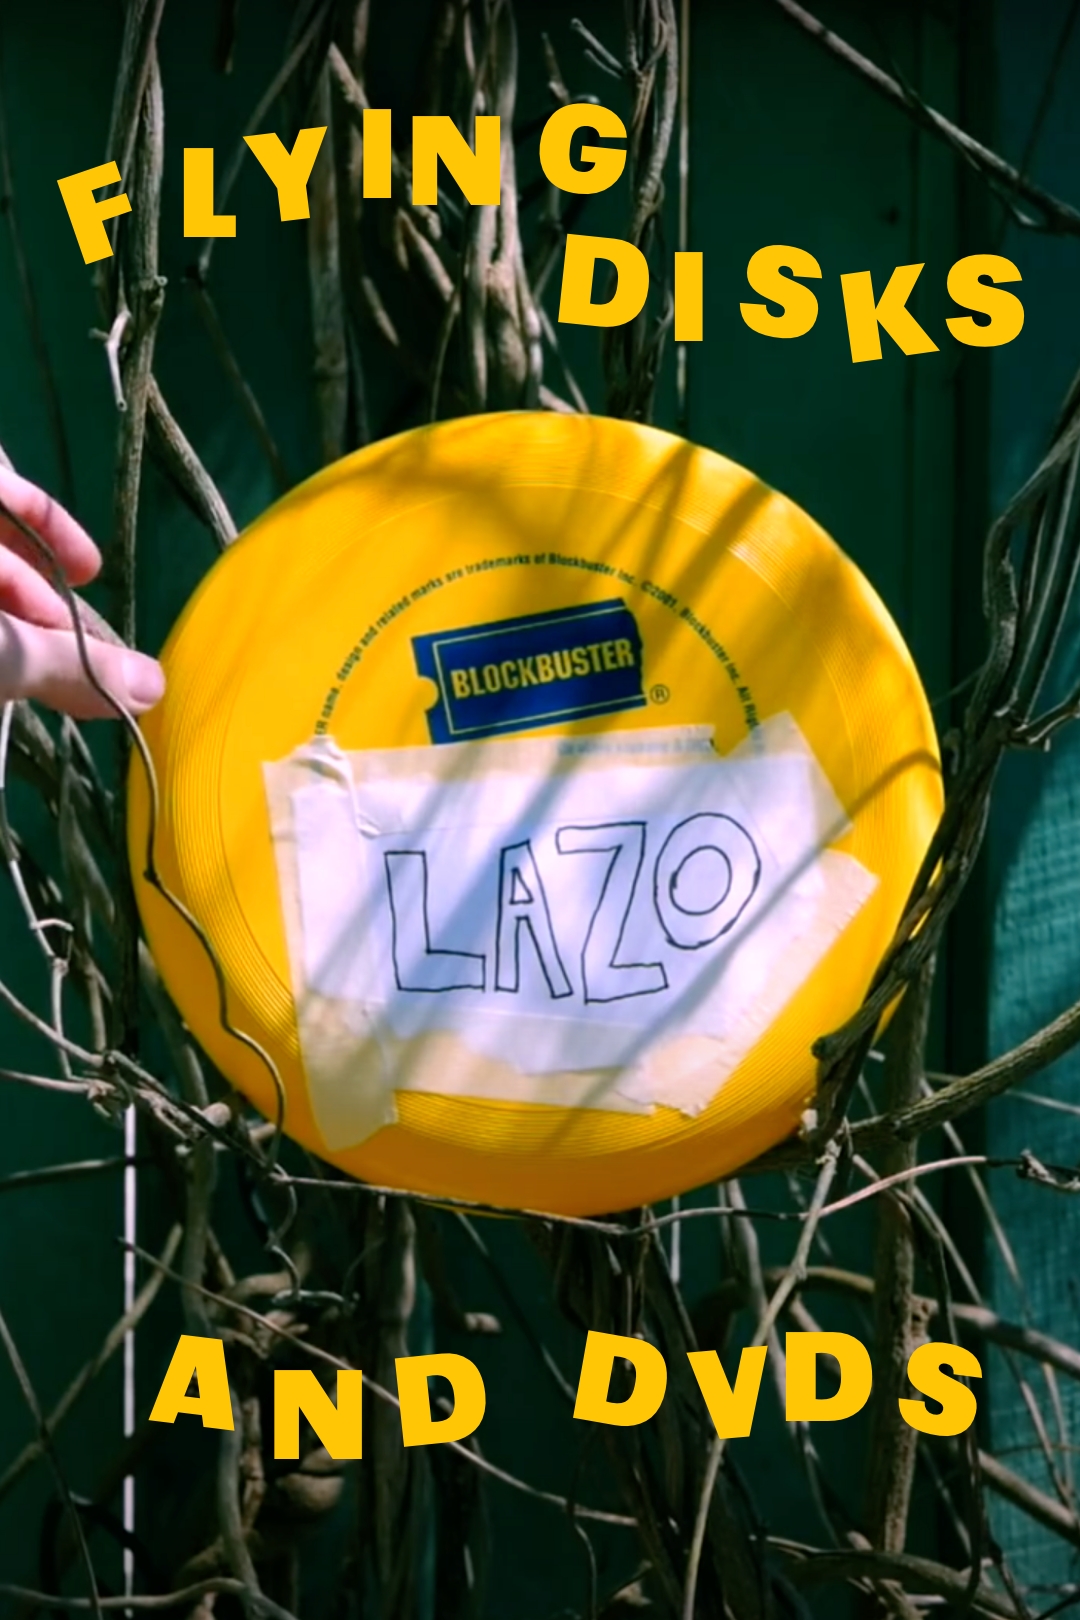 Poster for the film "Flying Disks and DVDs"